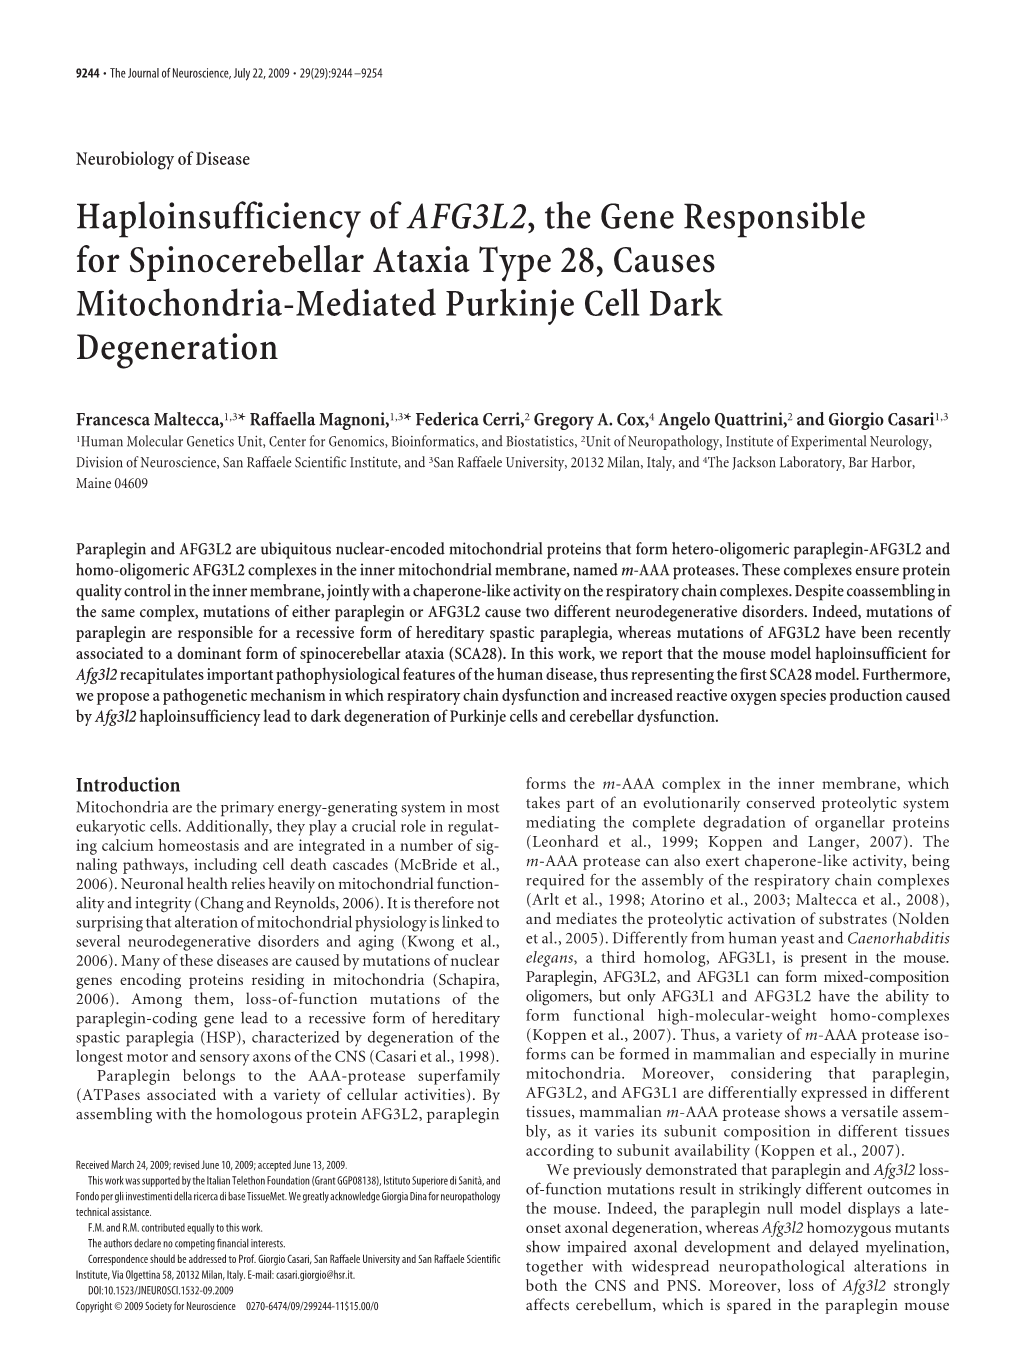 Haploinsufficiency of AFG3L2, the Gene Responsible for Spinocerebellar Ataxia Type 28, Causes Mitochondria-Mediated Purkinje Cell Dark Degeneration